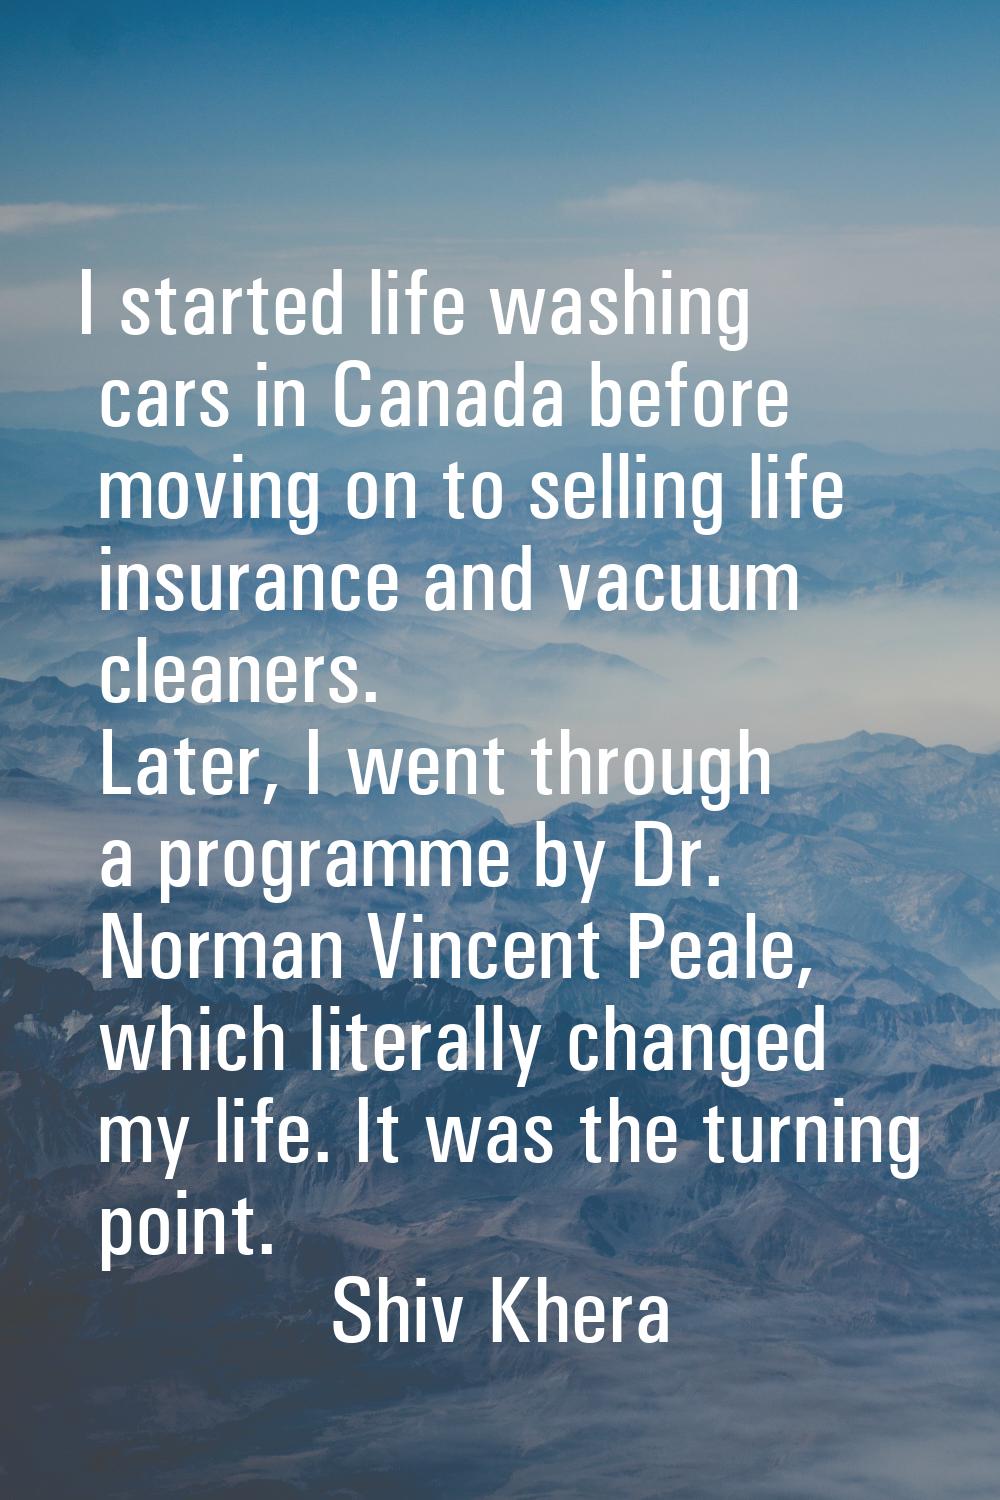 I started life washing cars in Canada before moving on to selling life insurance and vacuum cleaner